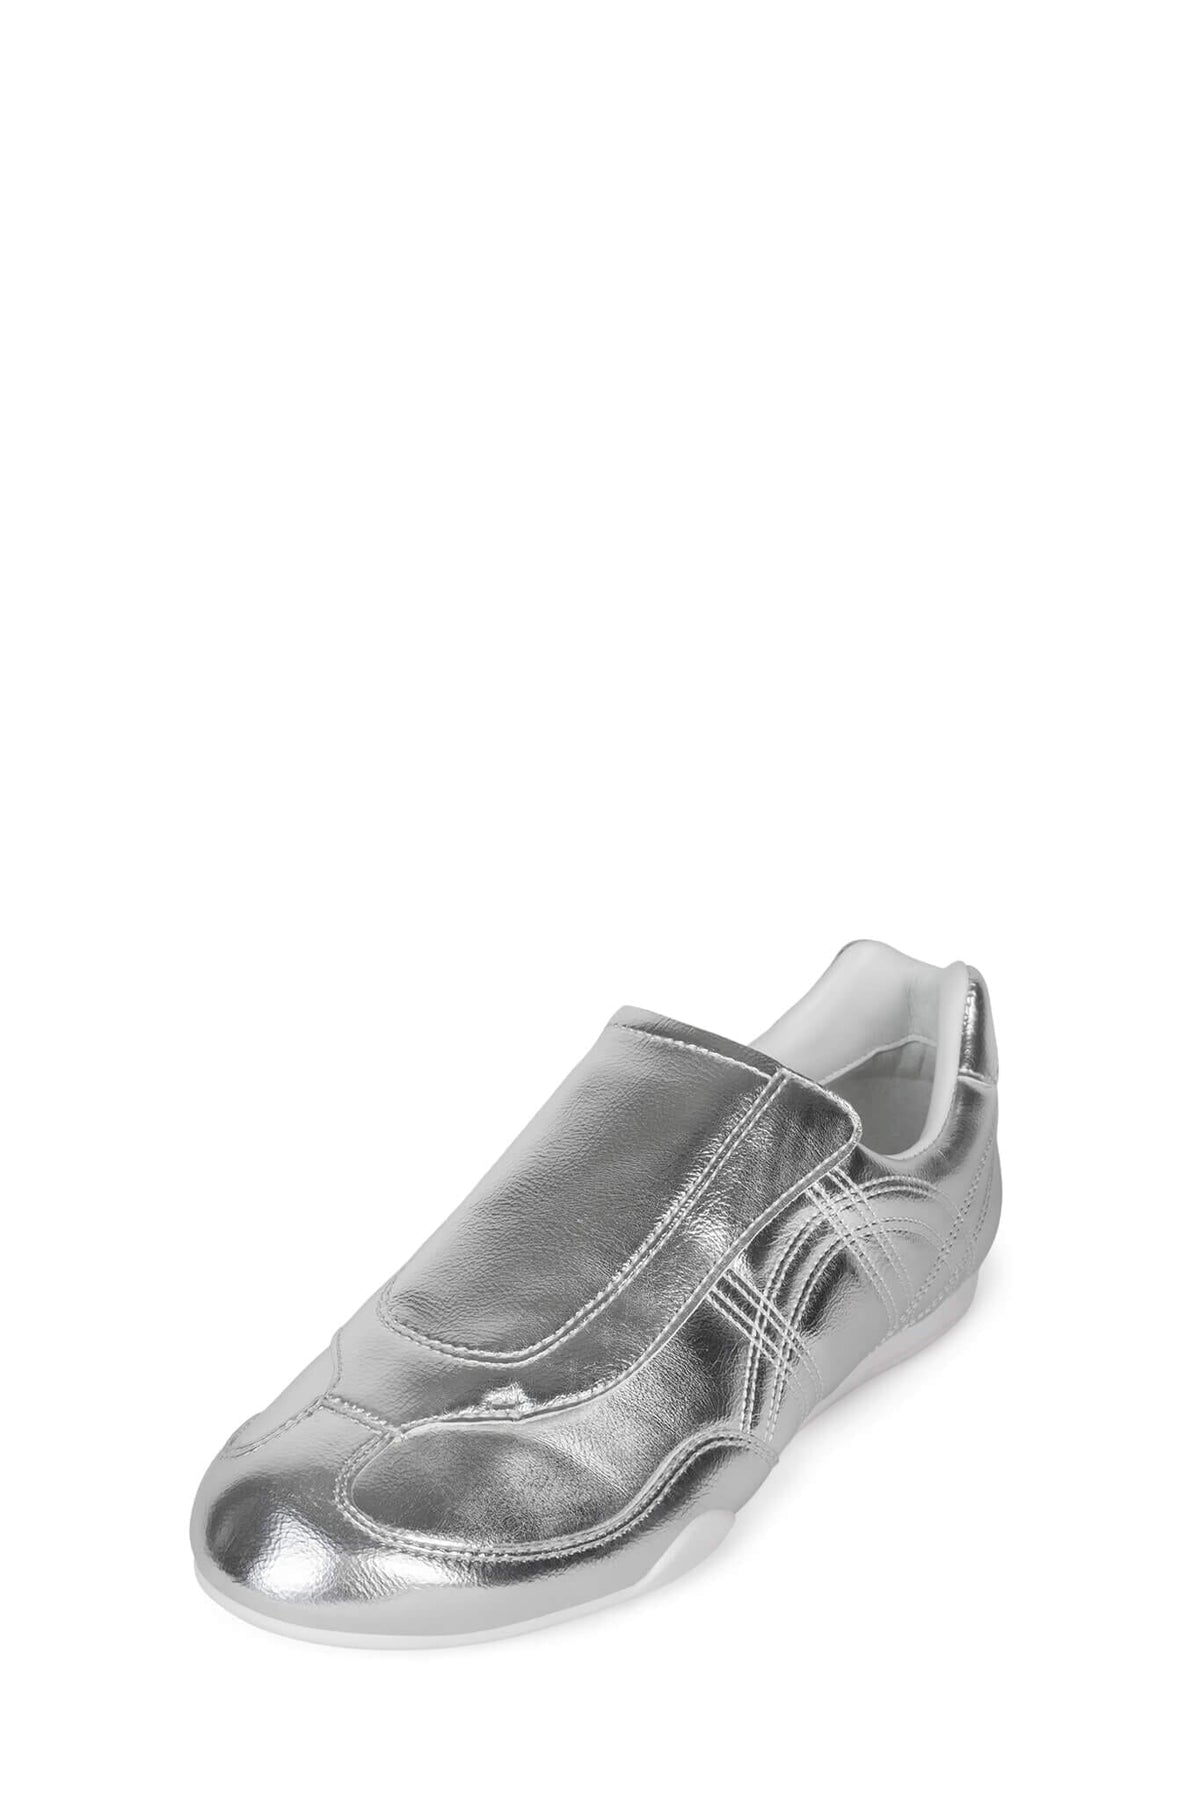 LEVELING Jeffrey Campbell Sneakers Silver White